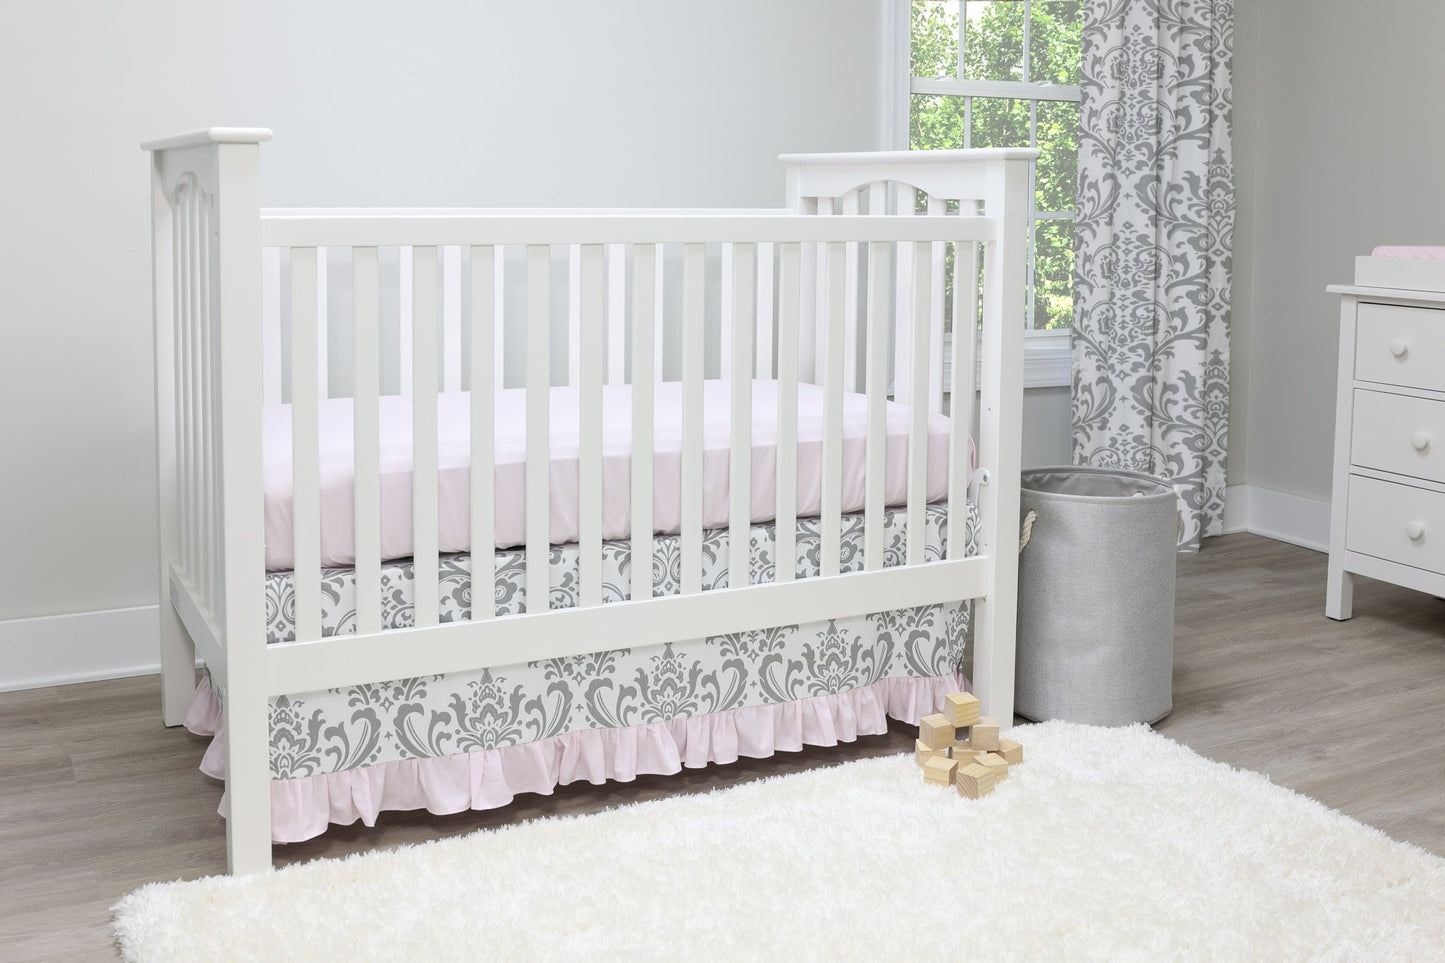 Pink and Gray Traditions Crib Bedding - 2 Piece Set - New Arrivals Inc